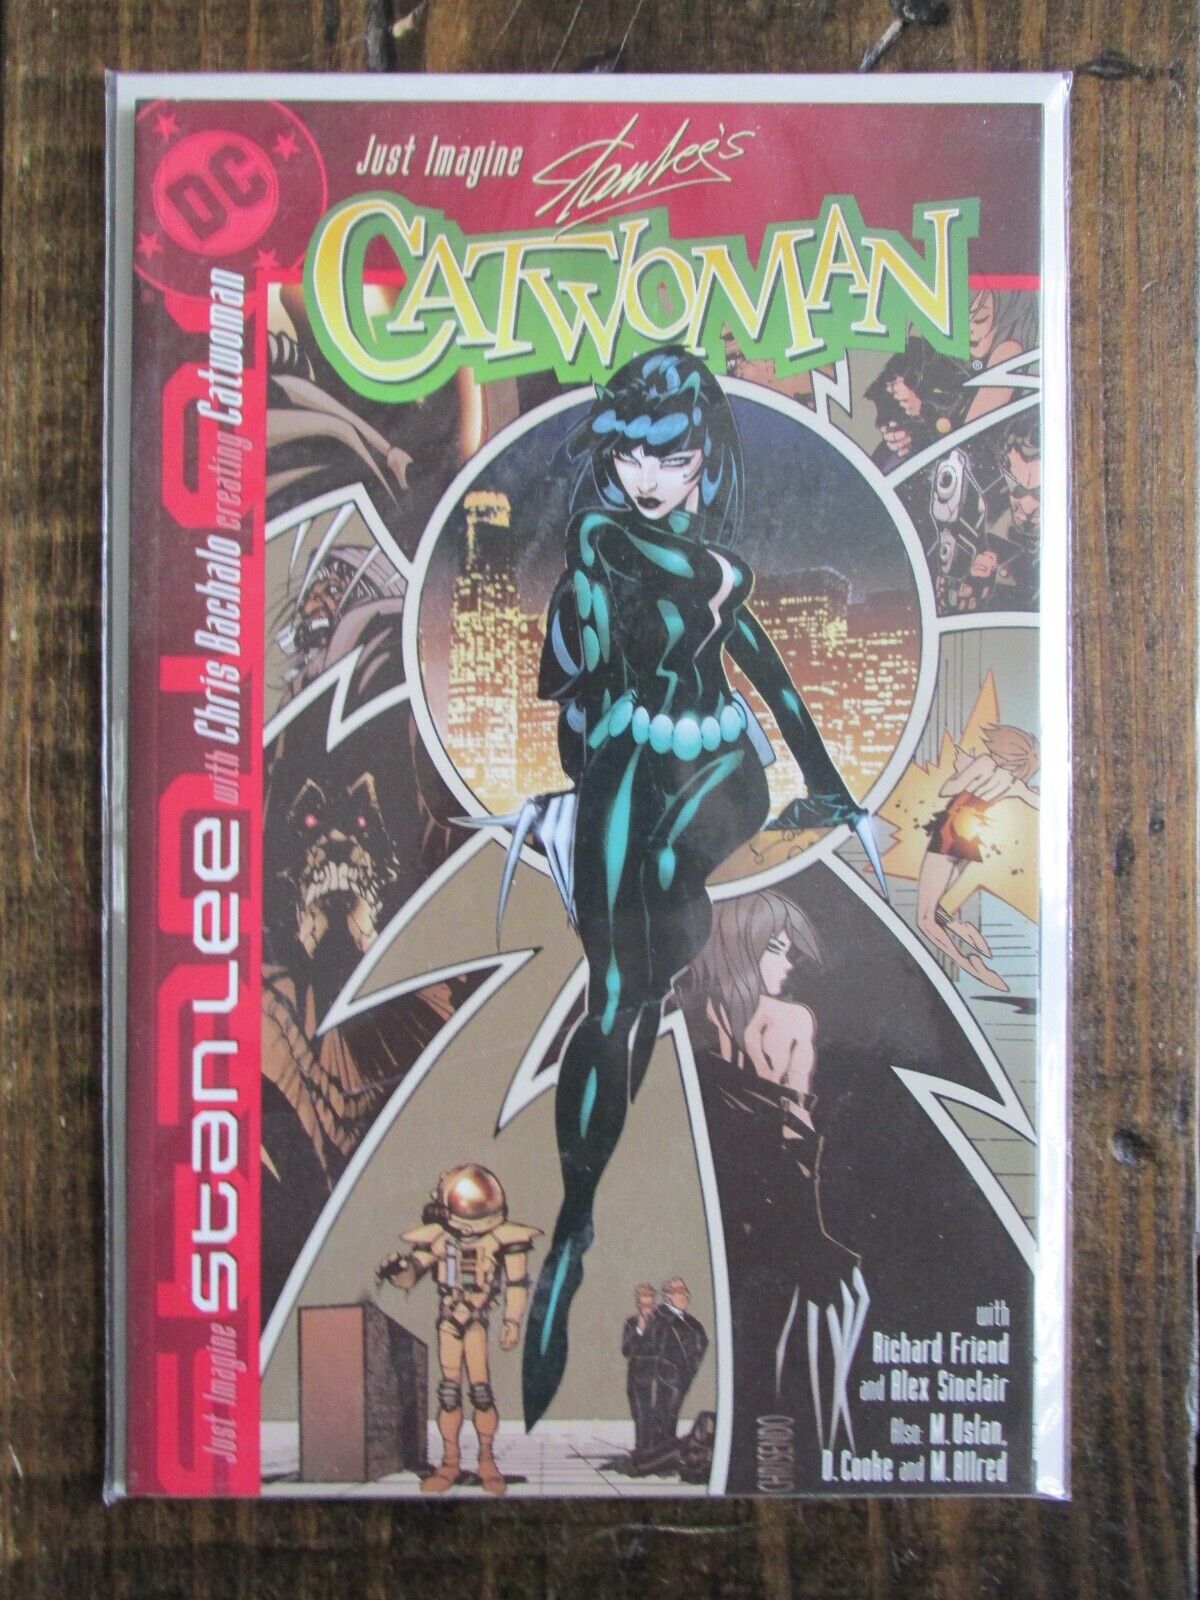 DC 2002 JUST IMAGINE STAN LEE'S CATWOMAN Comic Book Issue # 1 One Shot